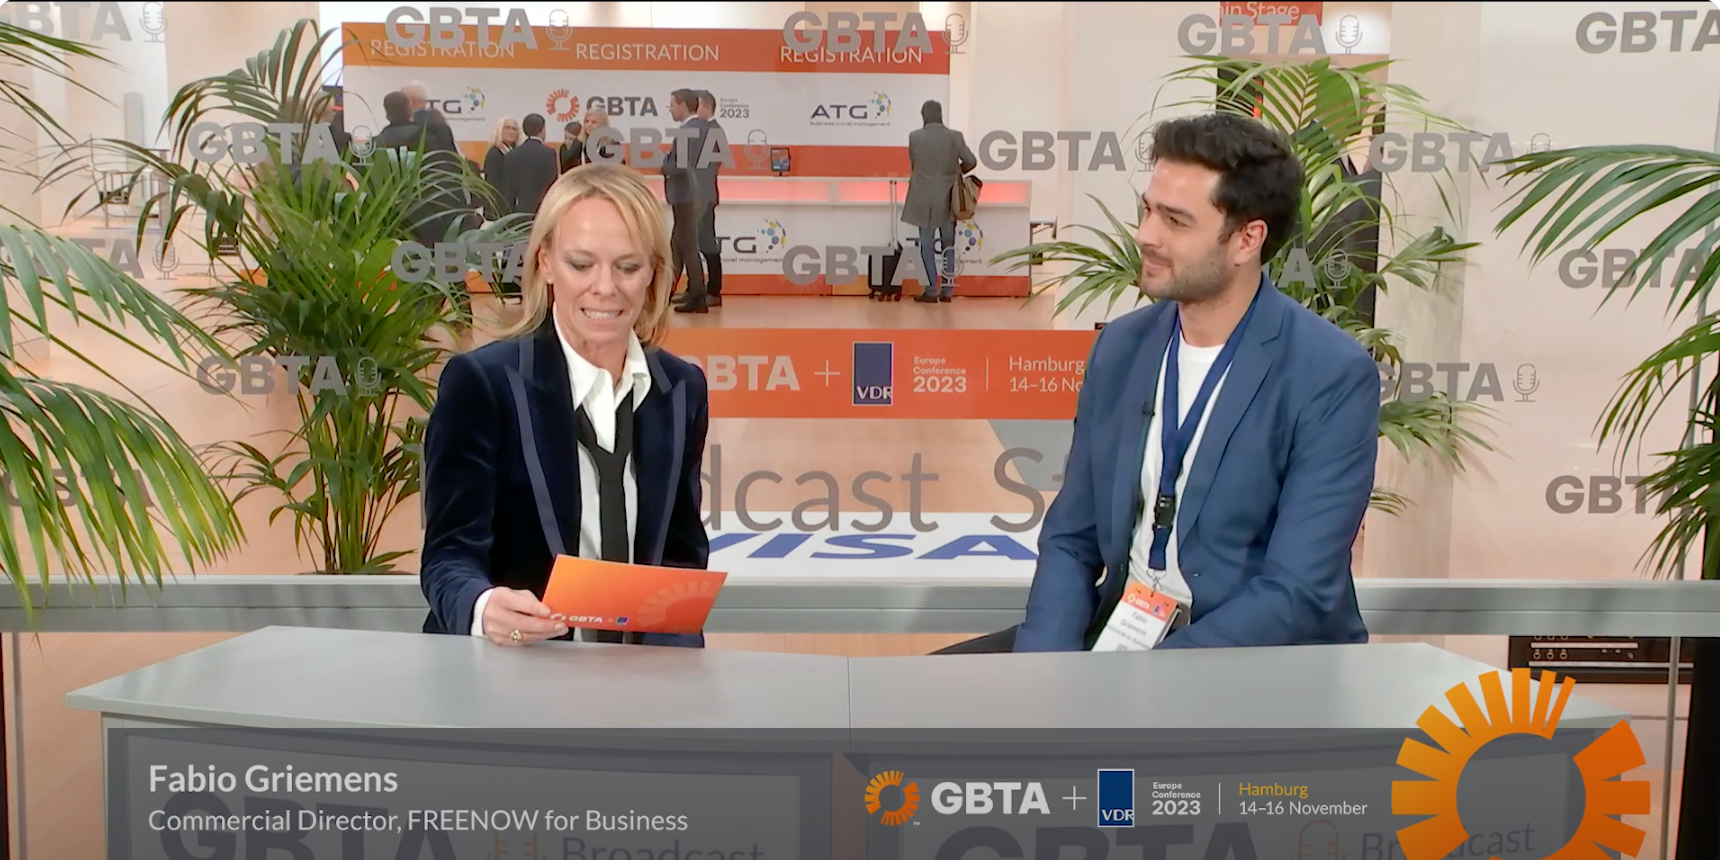 Fabio Griemens, Commercial Director FREENOW for Business at GBTA +VDR Europe Conference